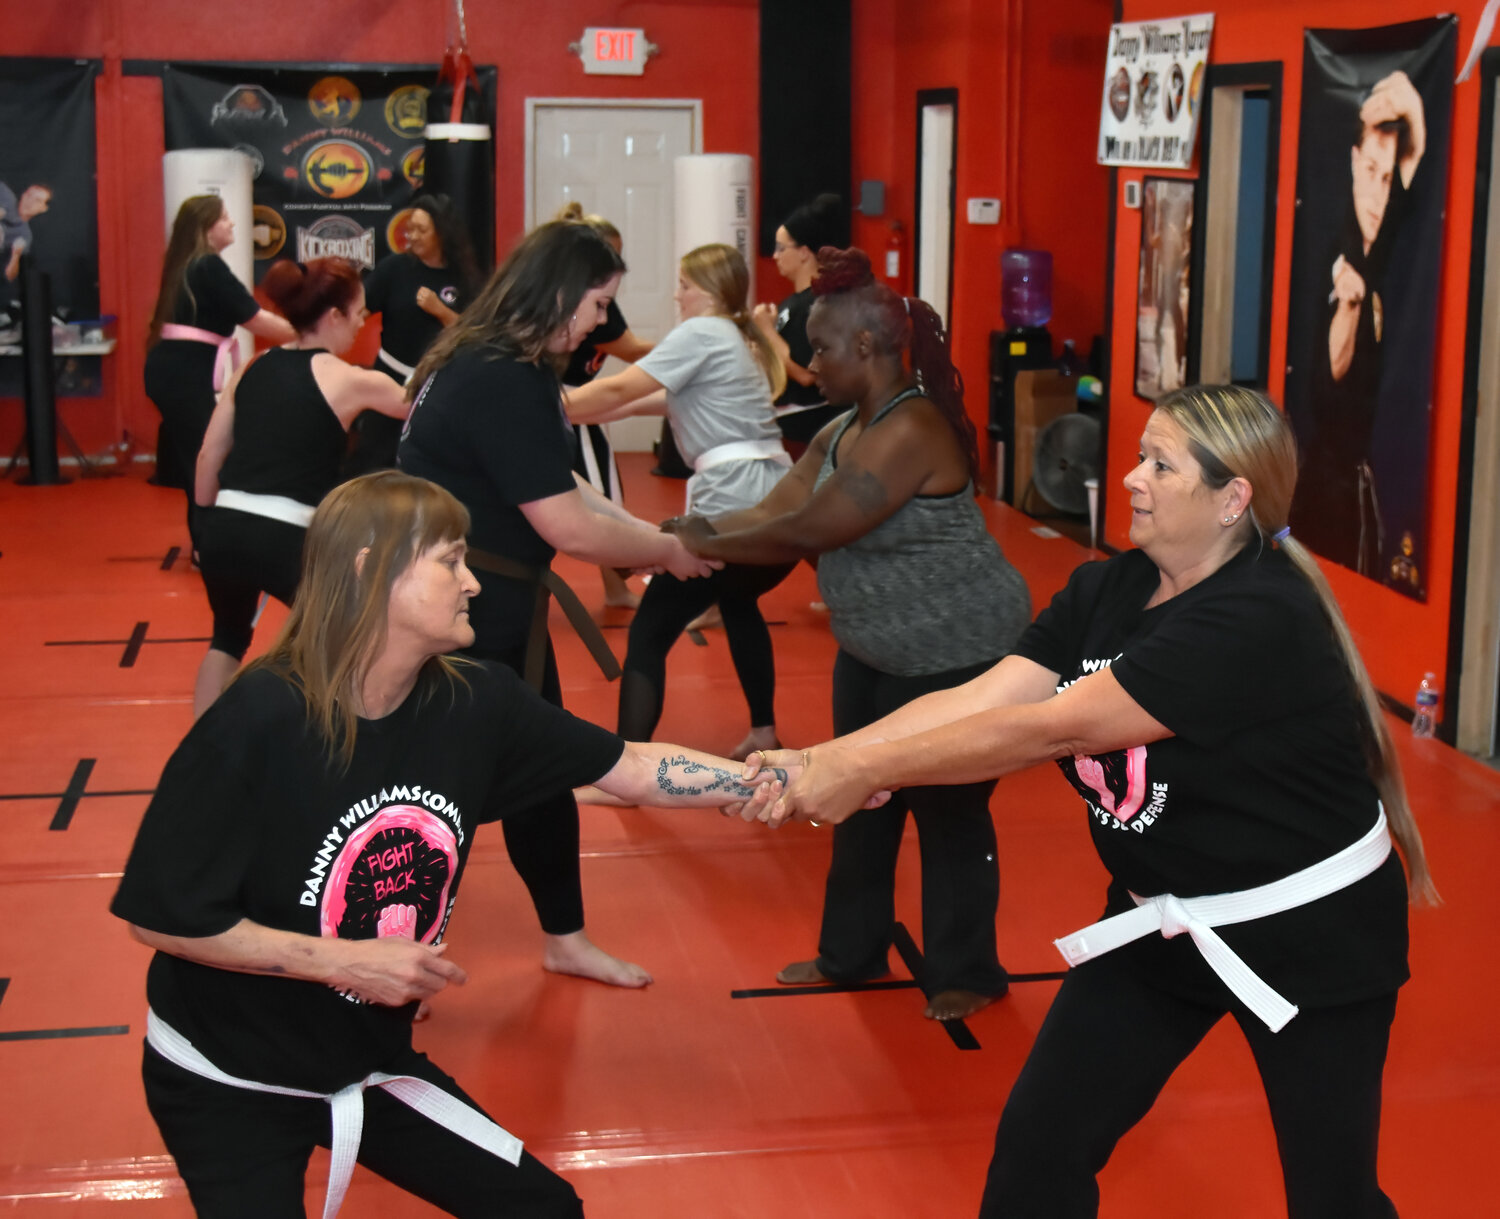 Danny and Glenda Williams’ Wednesday night self-defense class for women is so popular, they have added a Monday night and Friday night class.